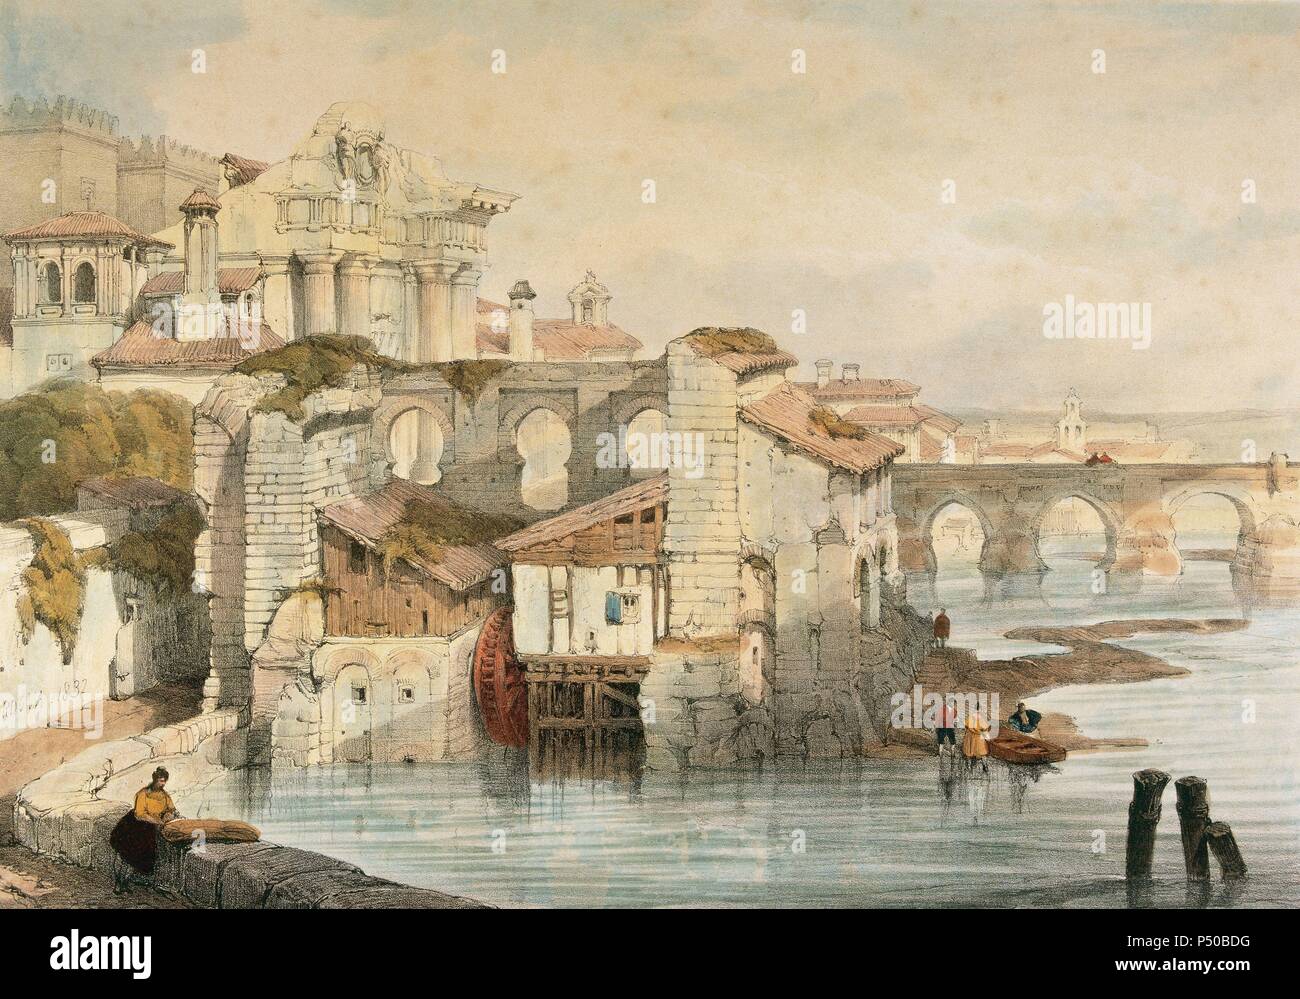 Spain. Cordoba. Mill. 1832. Drawing by David Roberts. Lithography by W. Gauci. London, 1837. Stock Photo